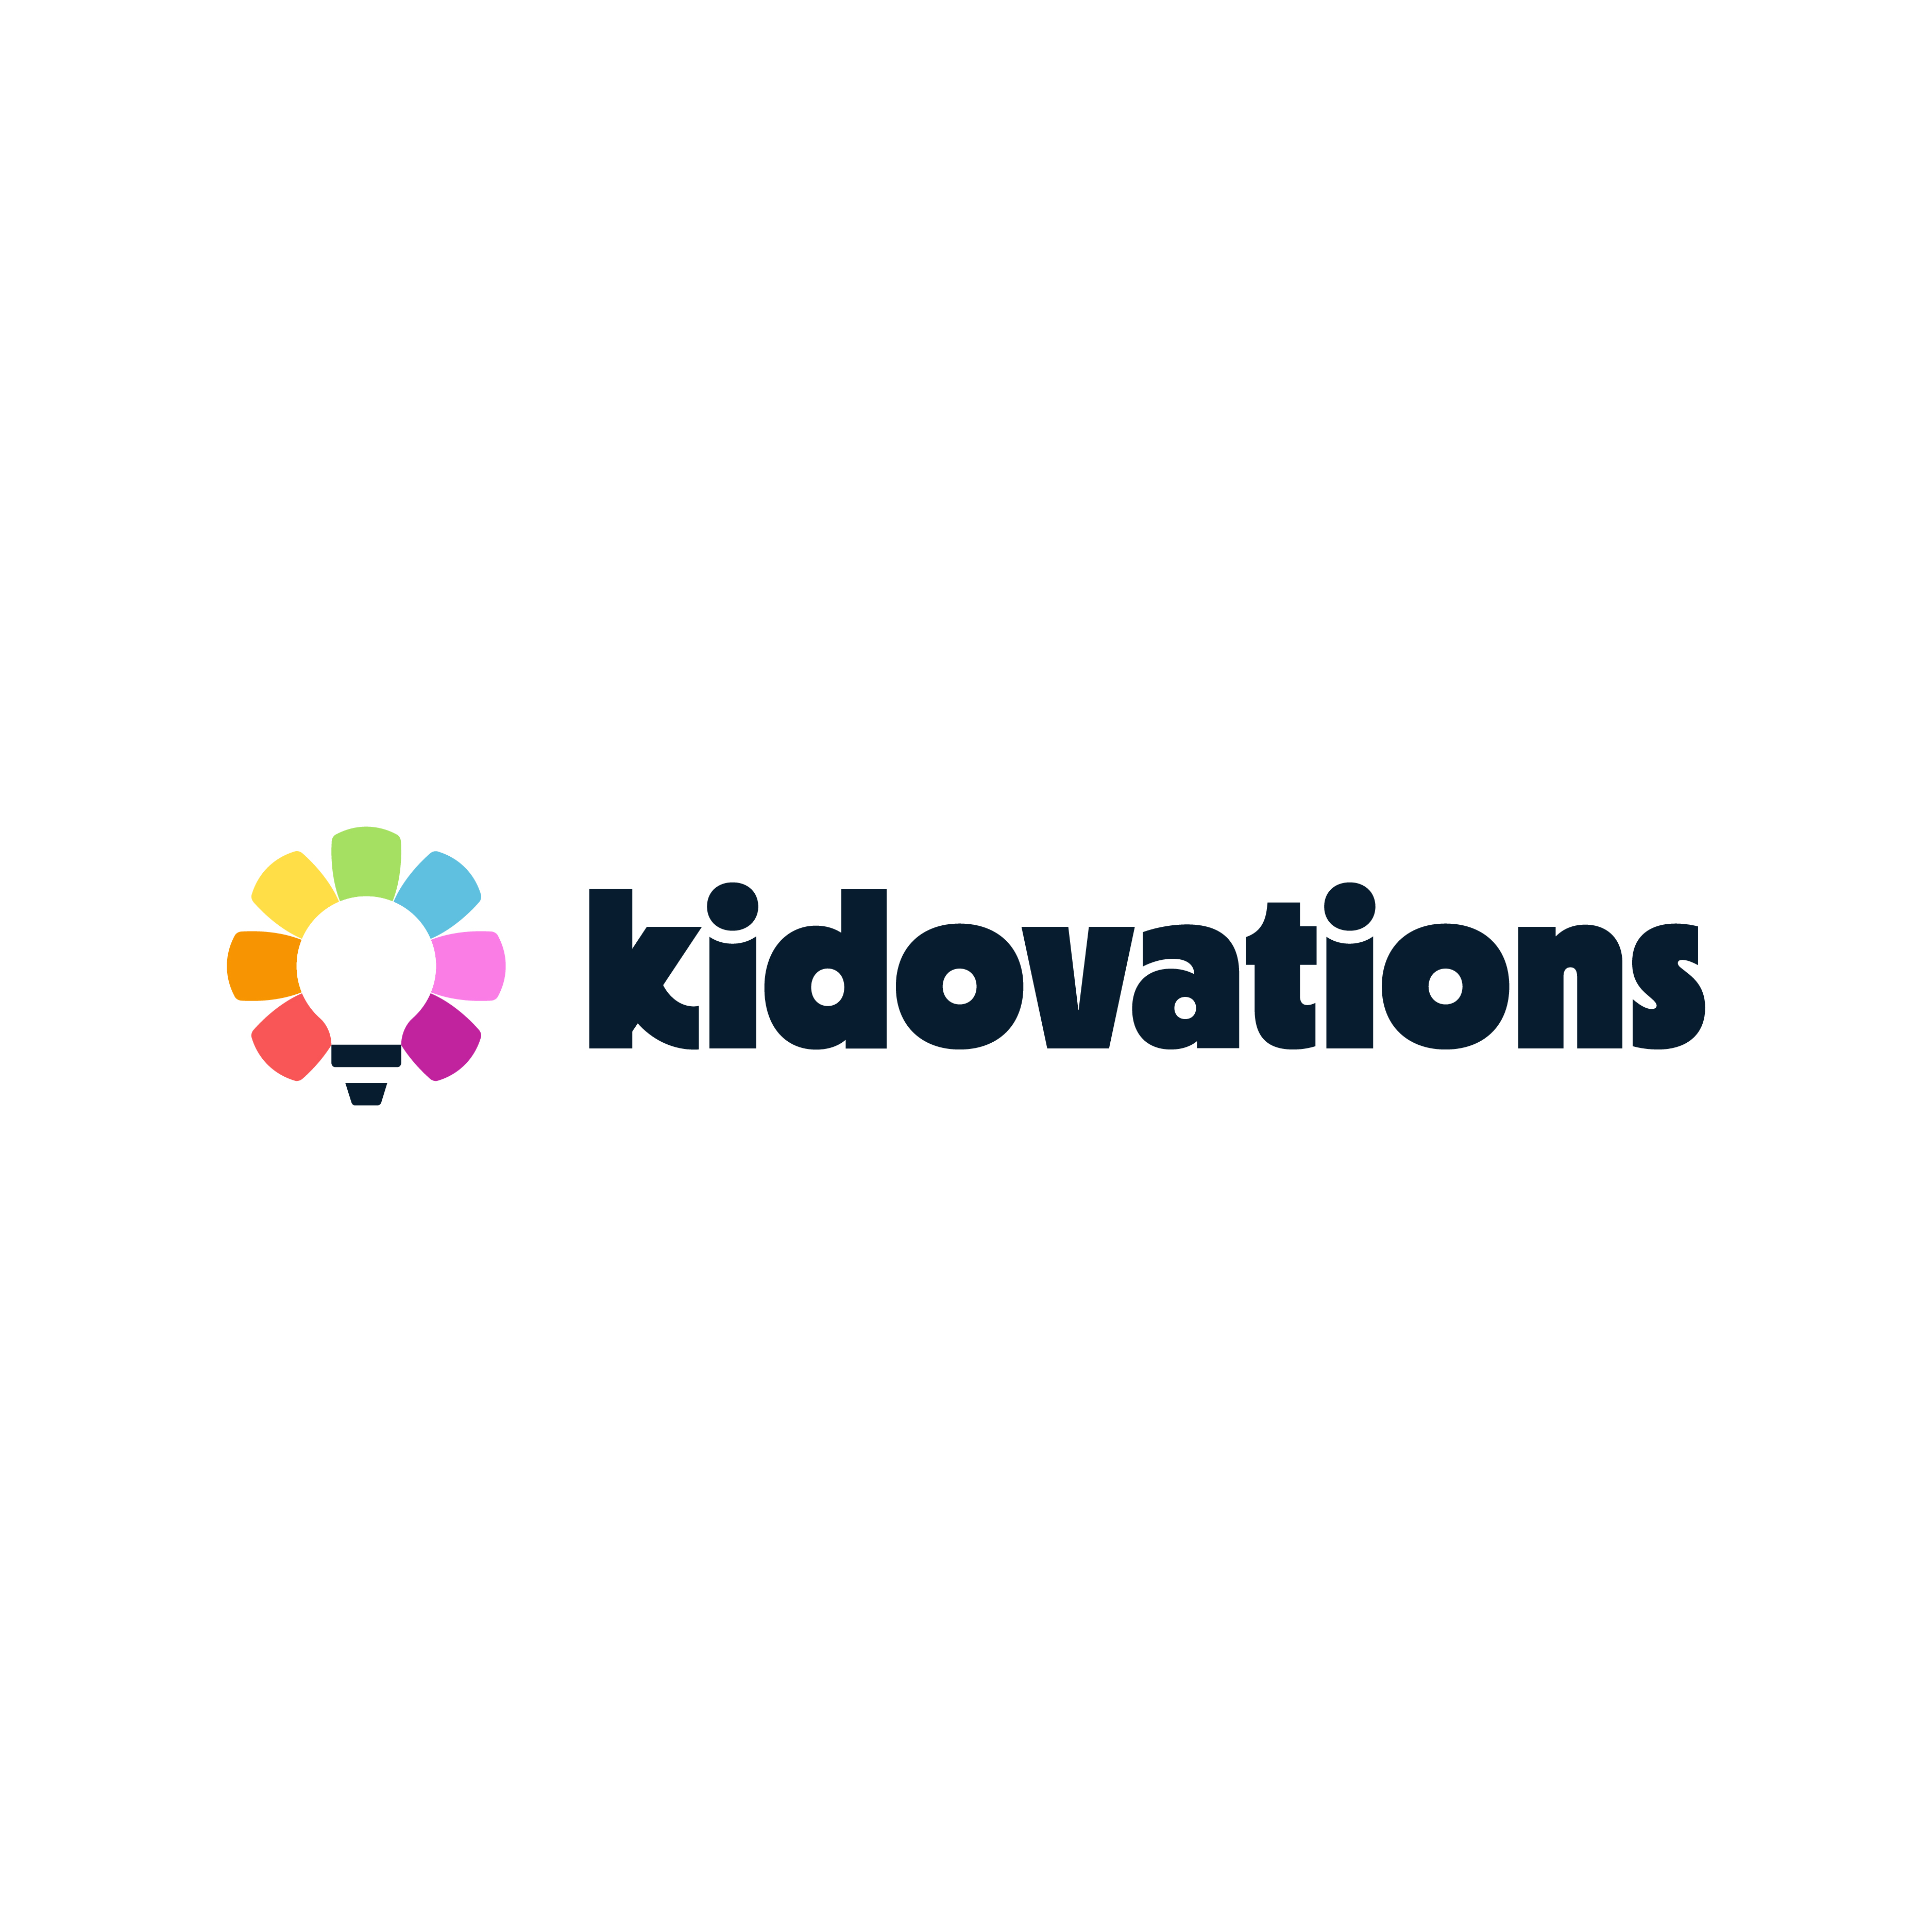 Kidovations Logo & Type - Horizontal logo design by logo designer Pioneer Design for your inspiration and for the worlds largest logo competition